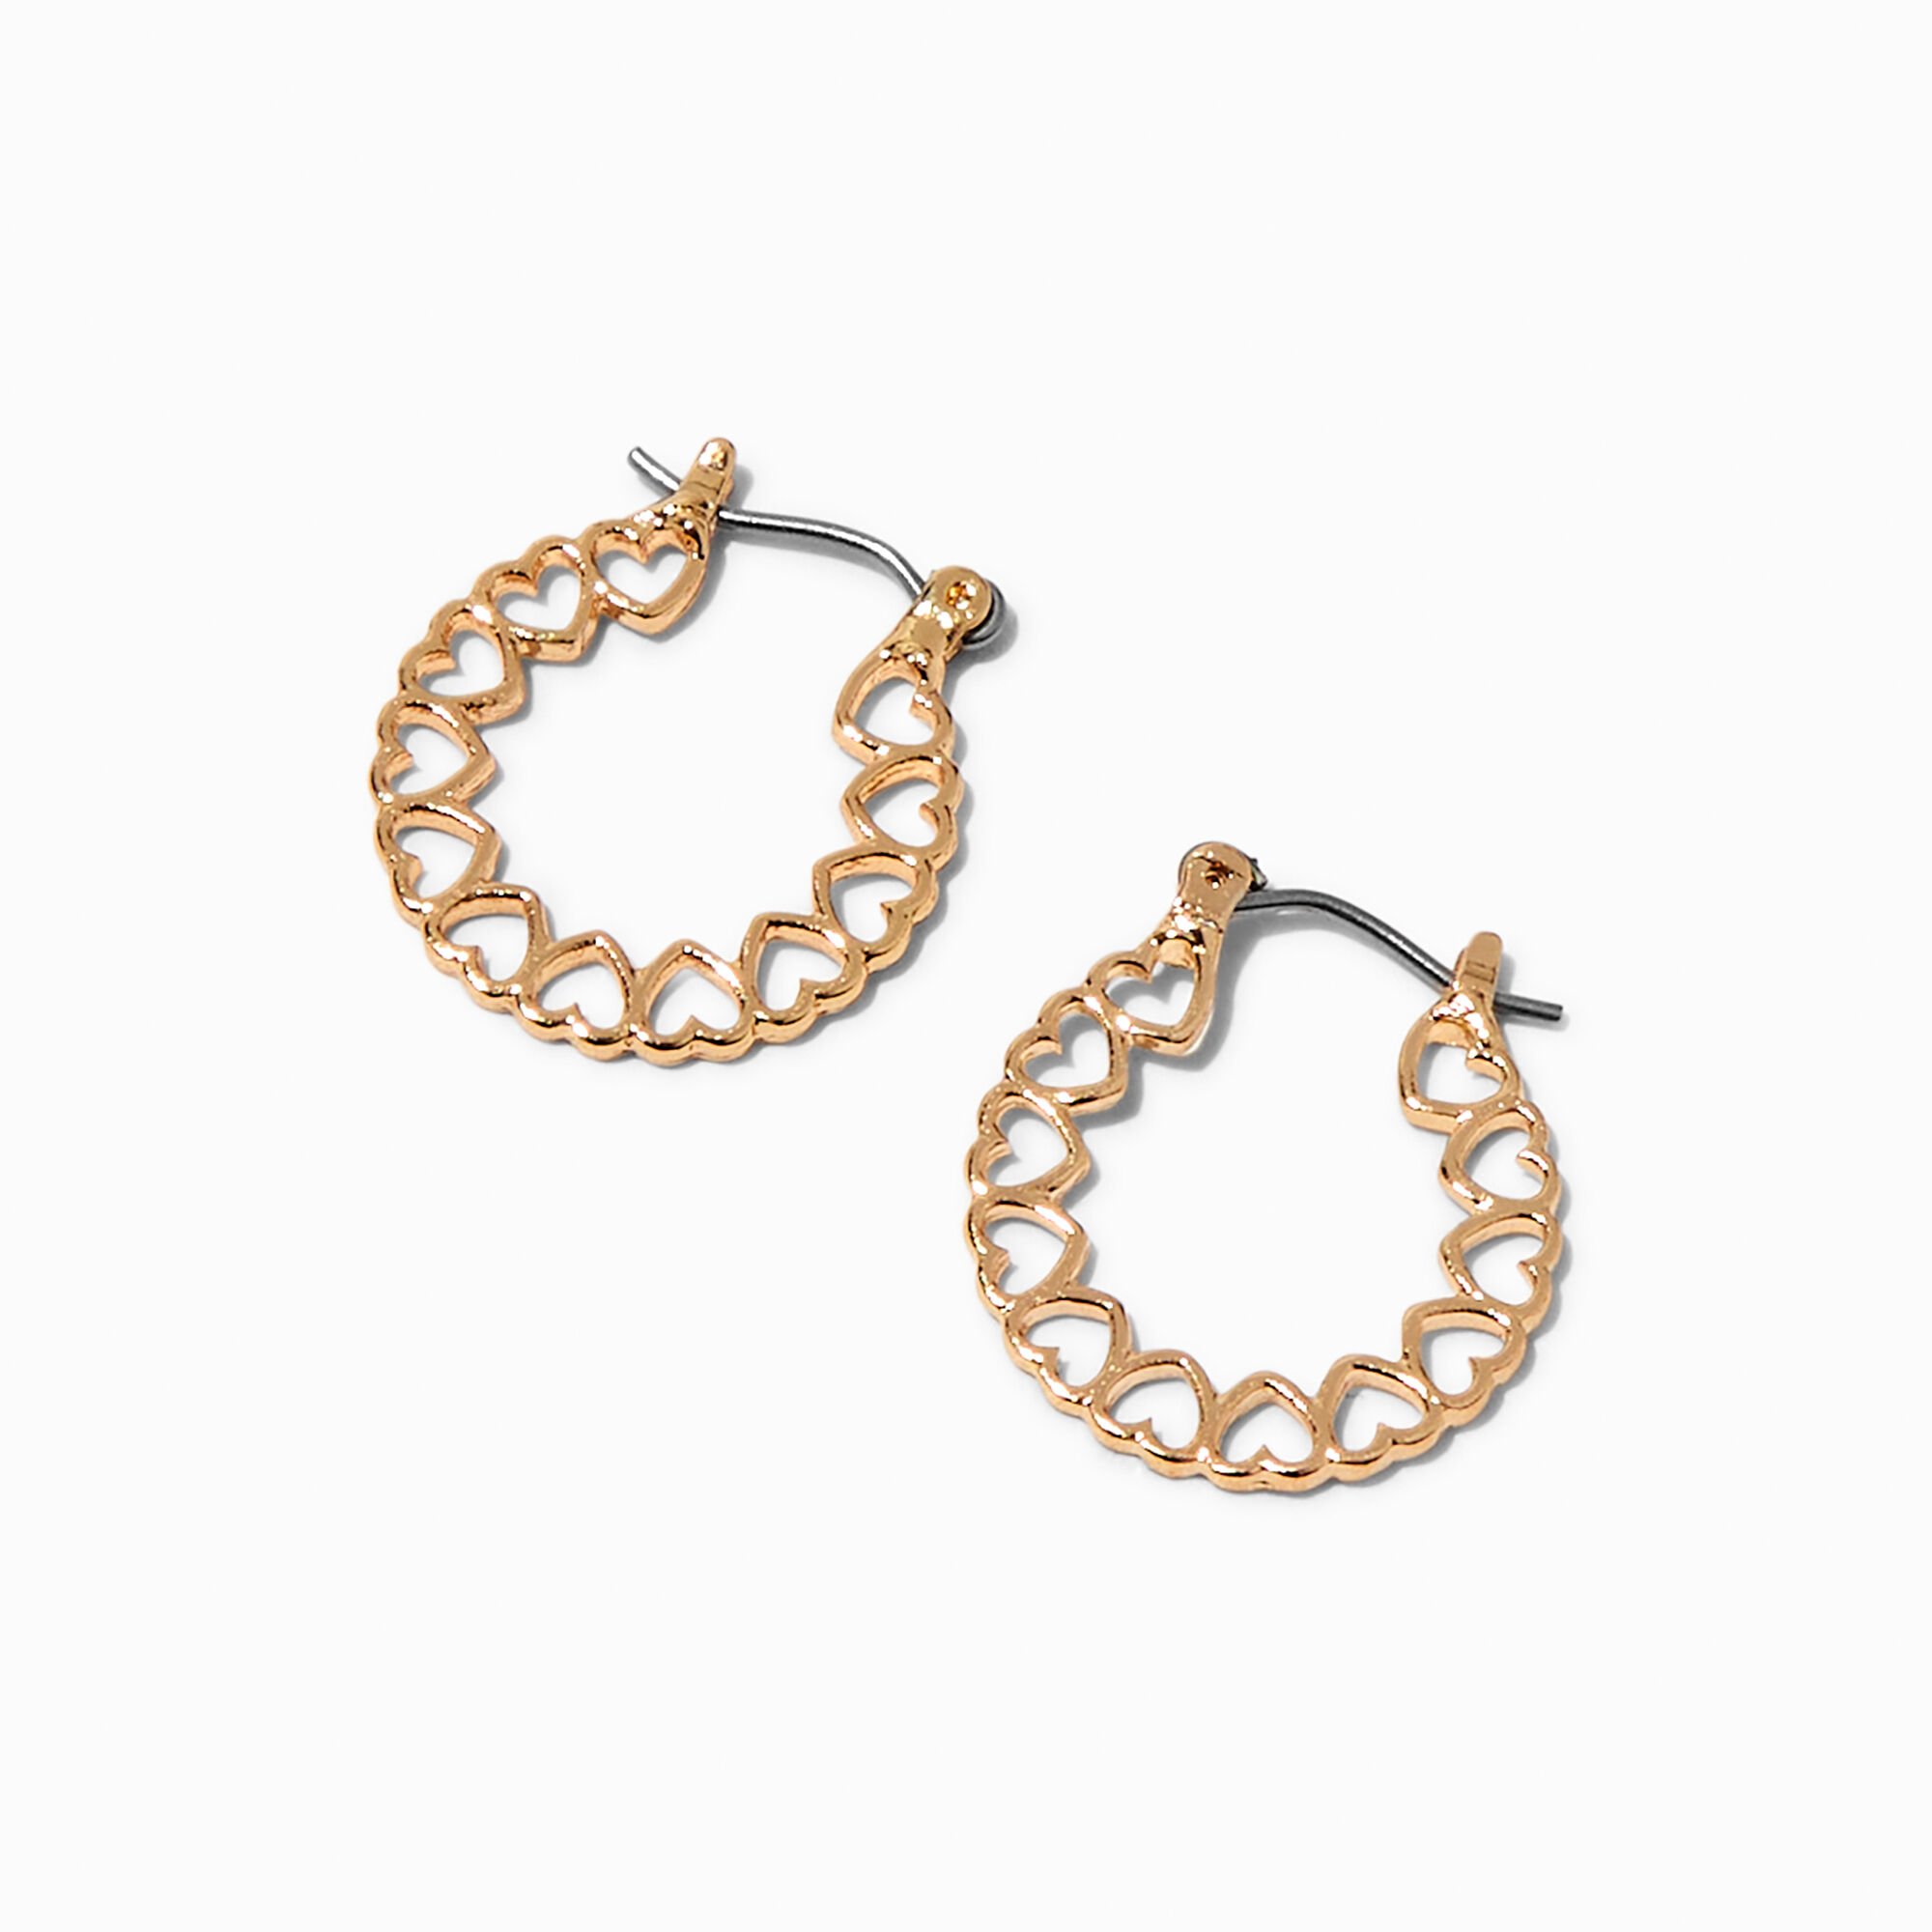 View Claires Tone Heart Print Hoop Earrings Gold information